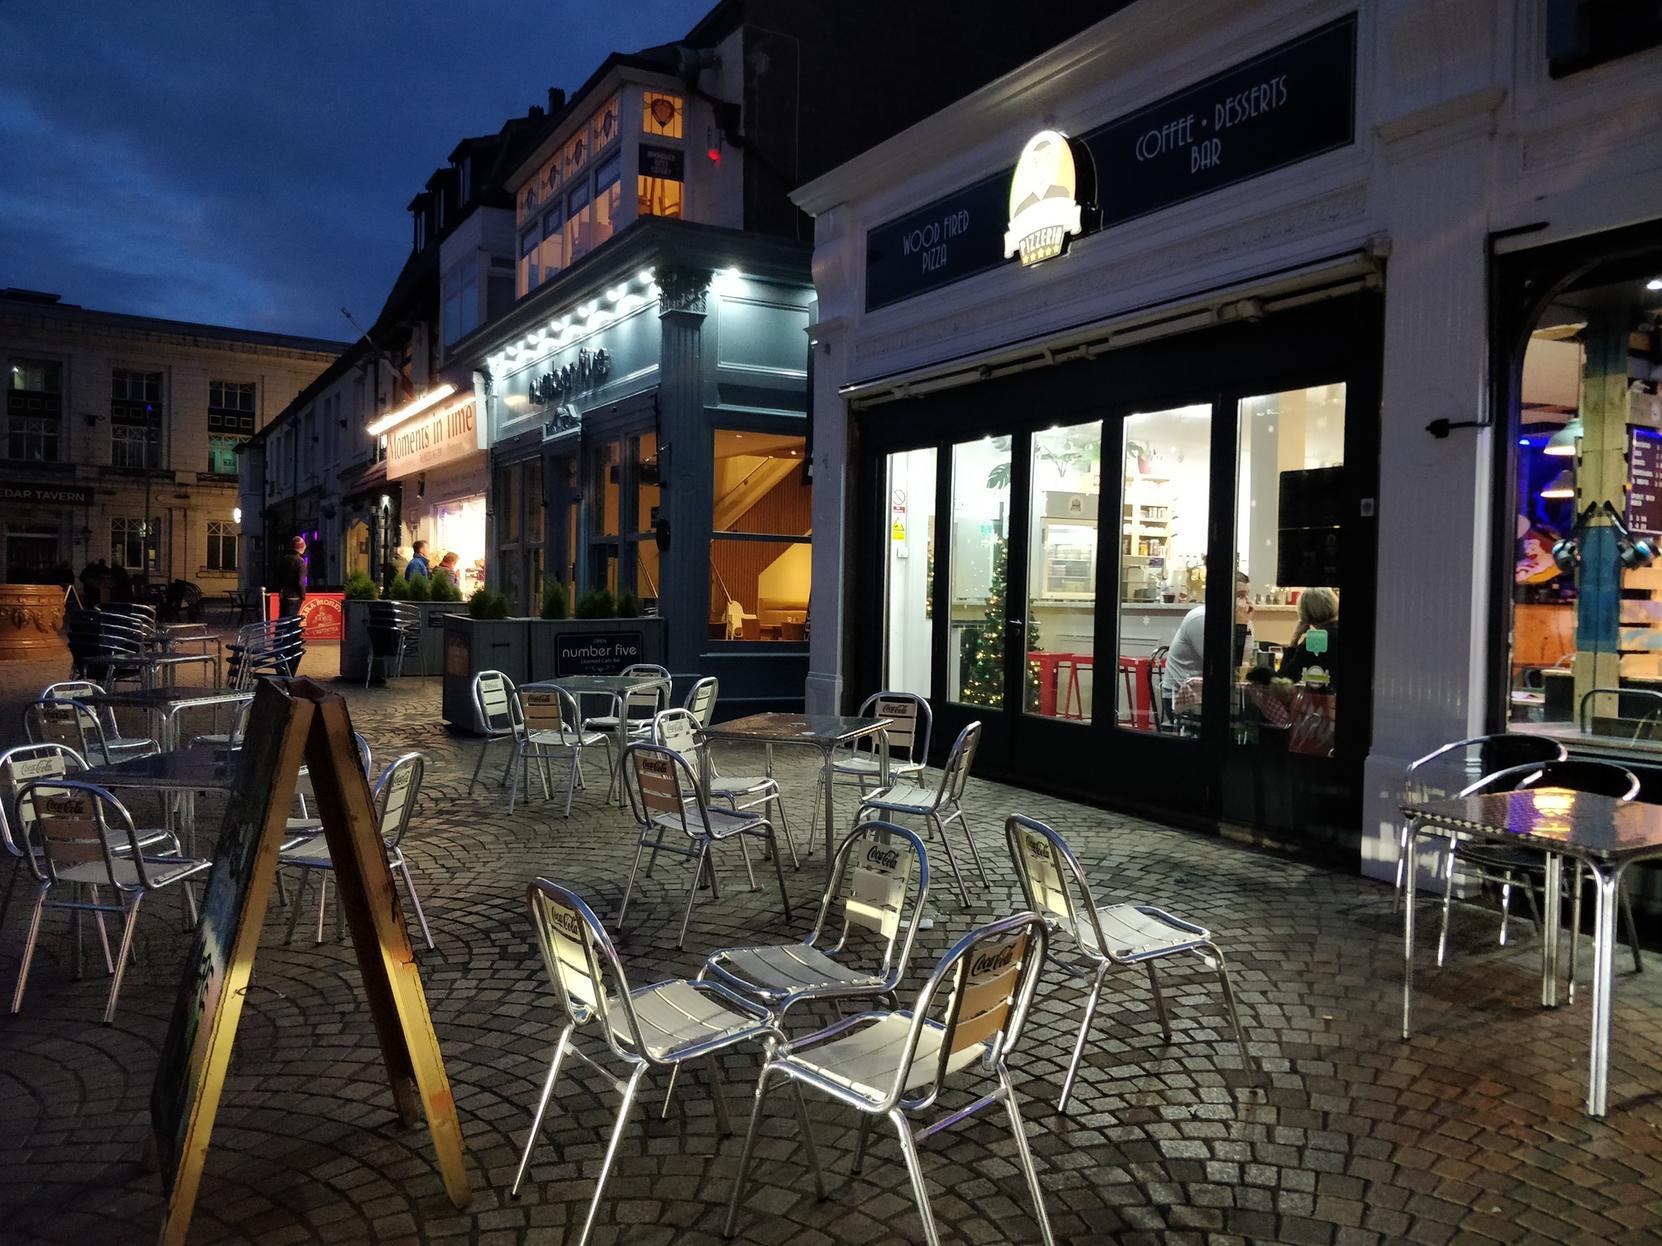 3 Cedar Square, Blackpool - "The pizza was among the best Ive ever had, service was impeccable brilliantly topping up the Prosecco whenever it was needed. We cant wait to return"